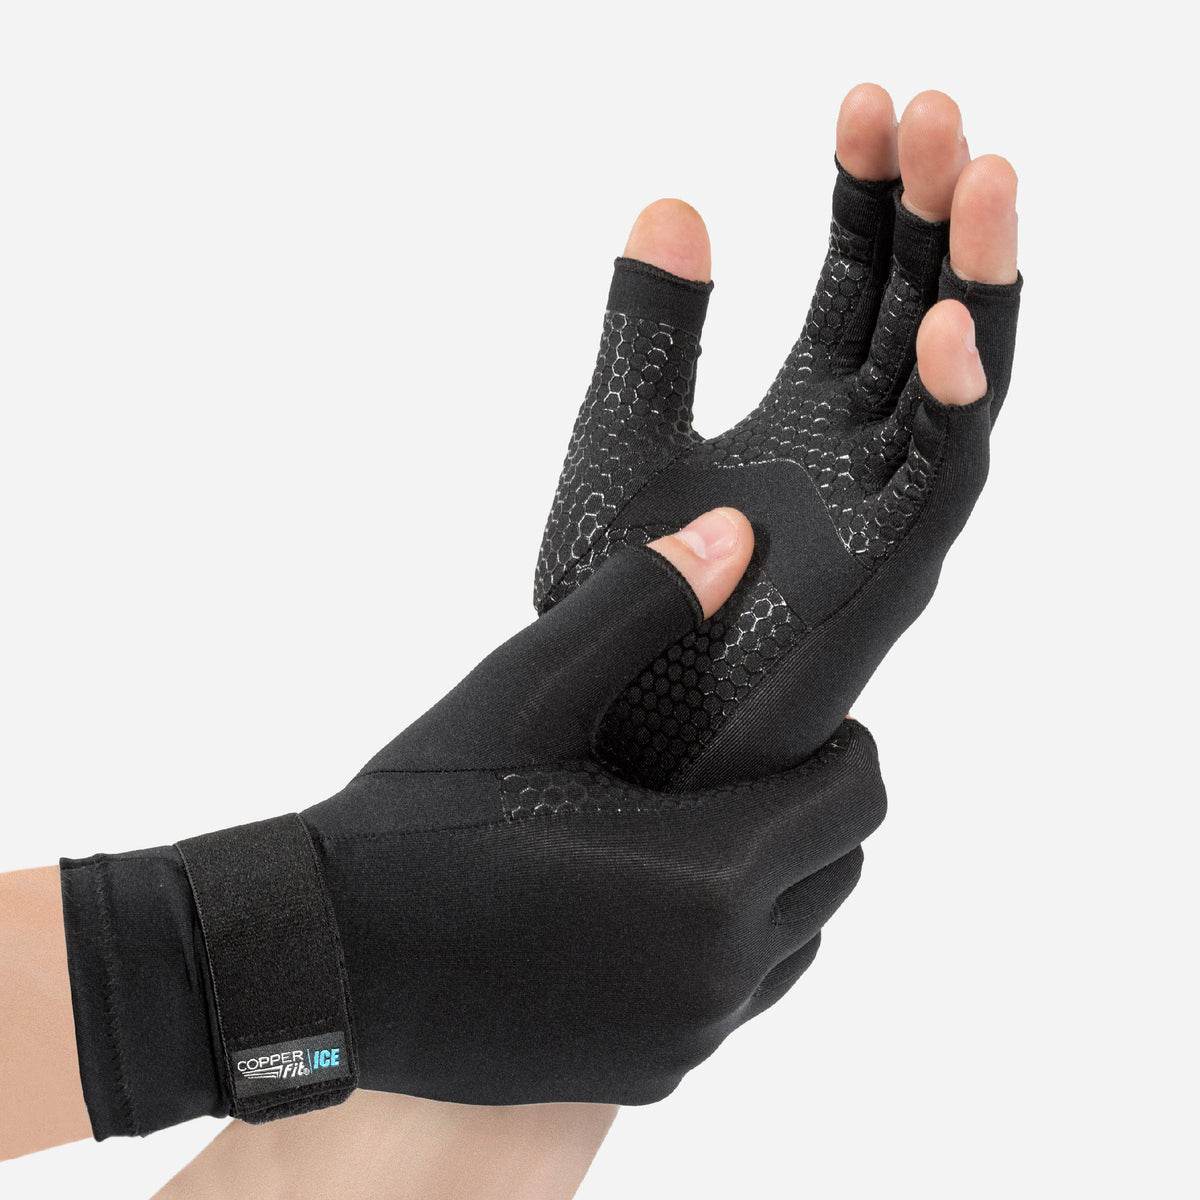 Infrared Arthritis Gloves Fingerless - Gentle Compression for Pain Relief